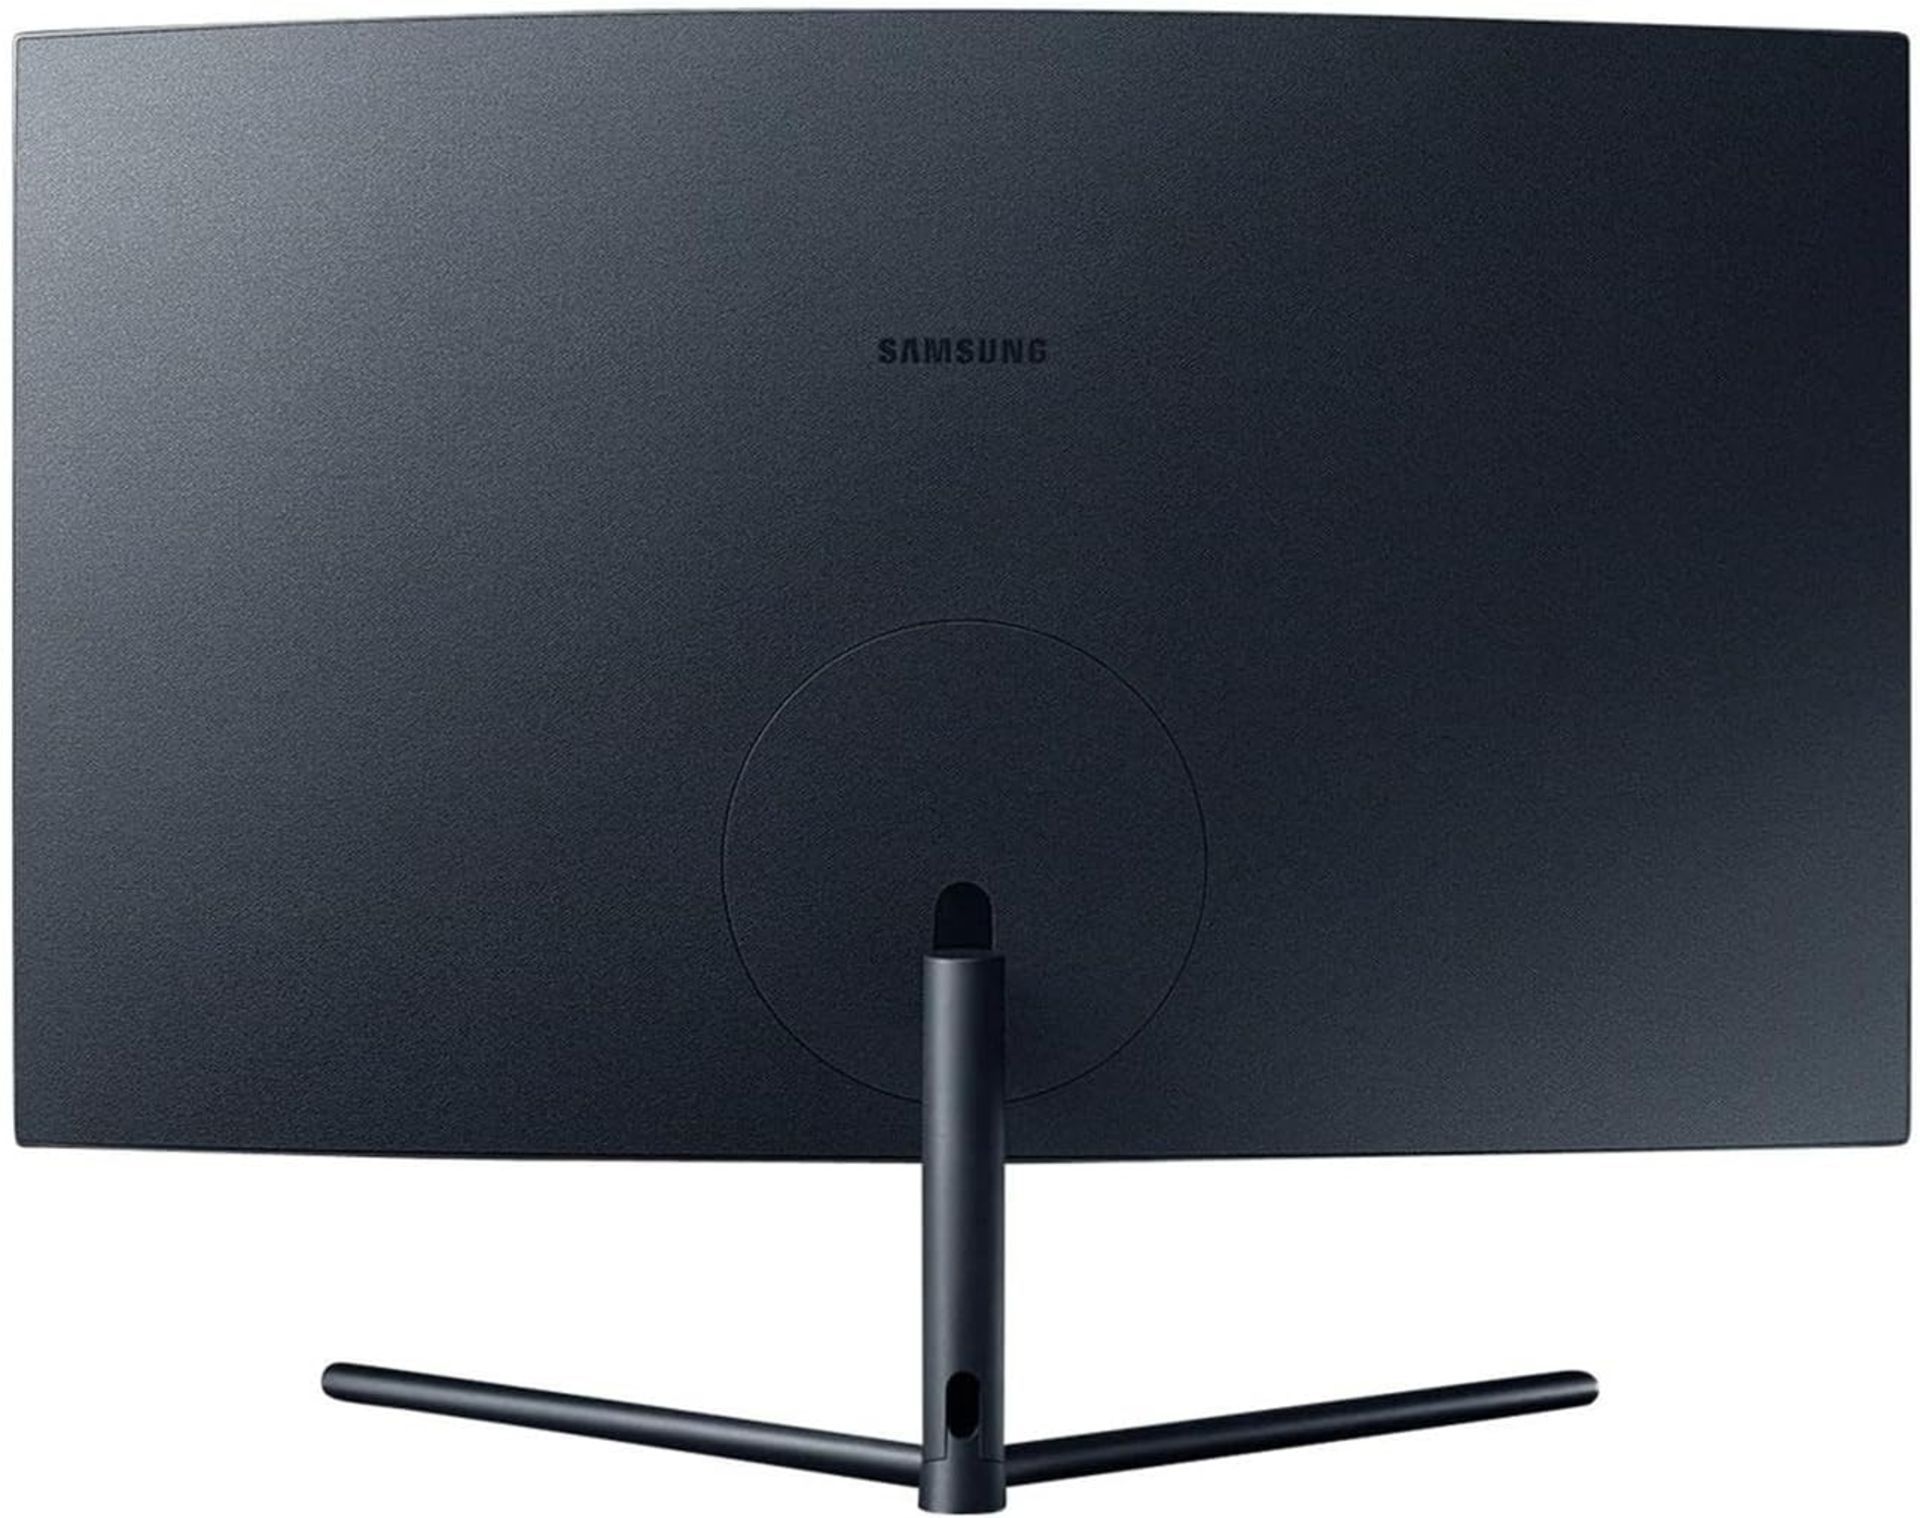 NEW & BOXED SAMSUNG U32R590CWP 32 Inch Curved 4K Monitor. RRP £325. (PCKBW). With 4x more pixels - Image 5 of 5